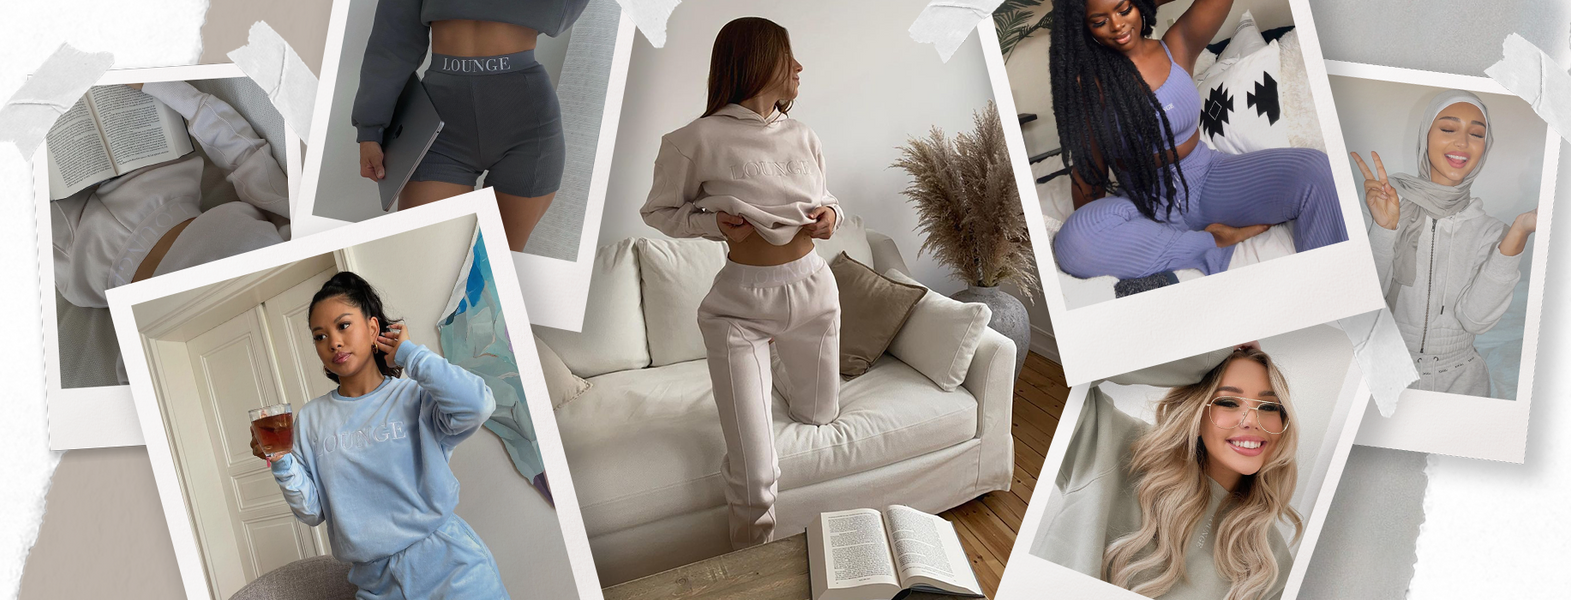 Loungewear Must-Haves For Studying